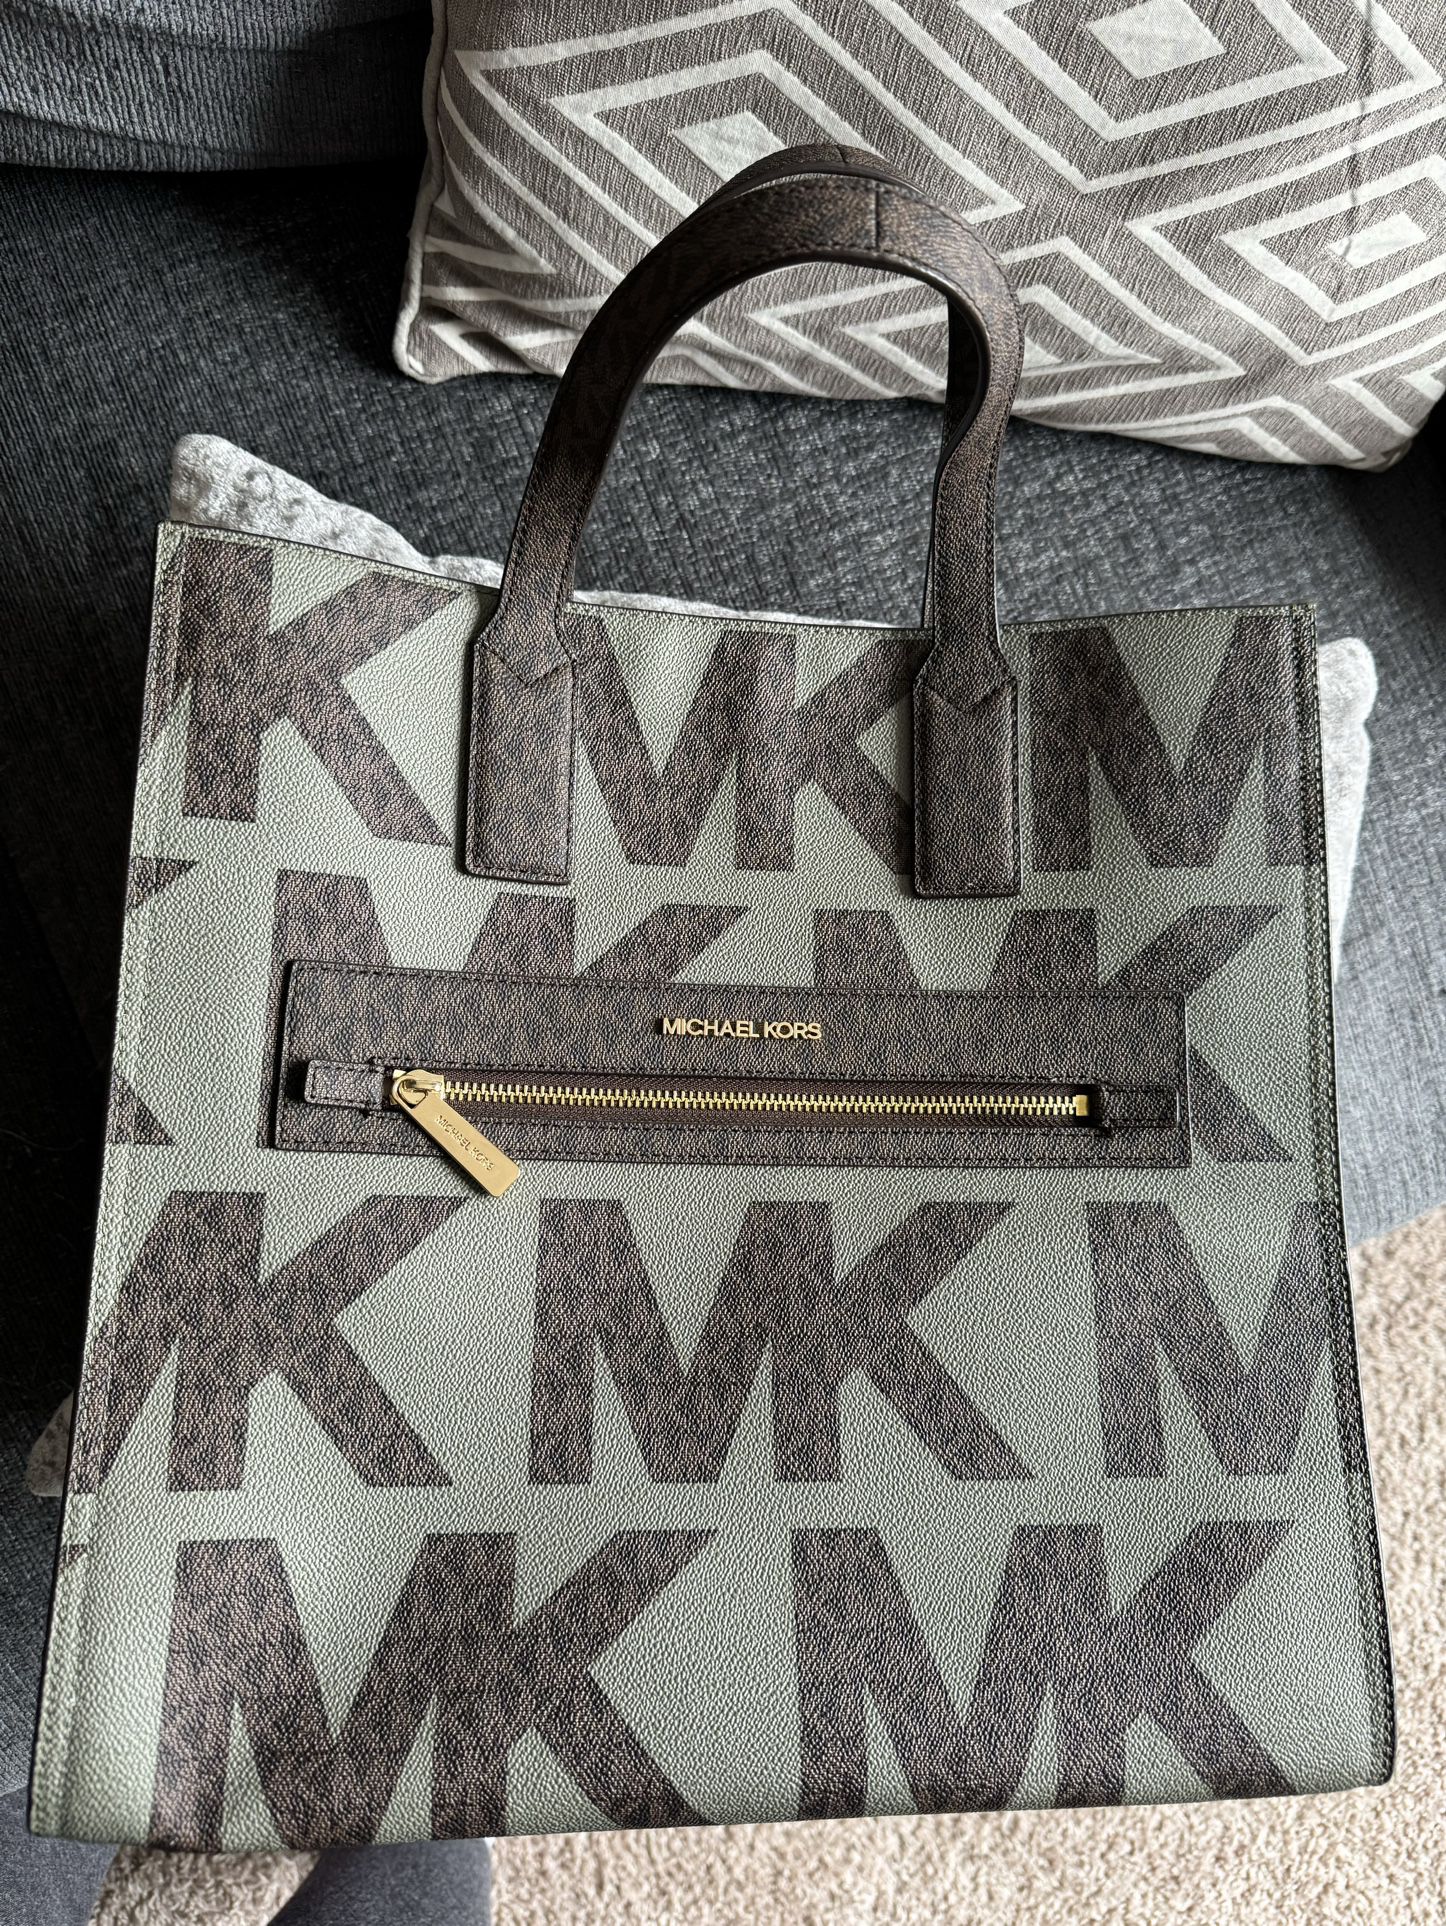 Michael Kors Tote Bag and Clutch For Sale